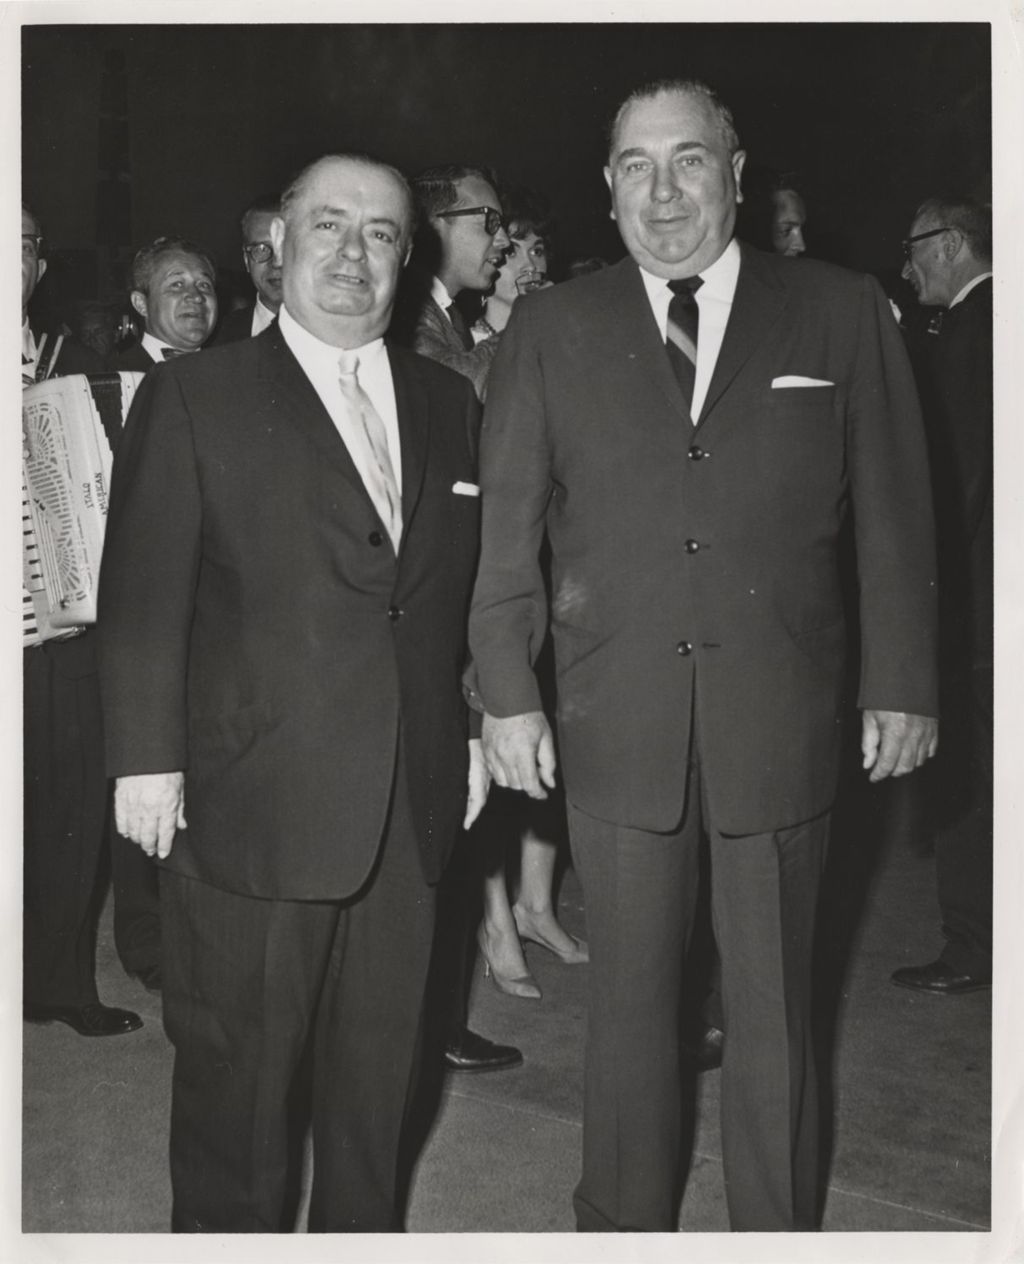 Miniature of Richard J. Daley and a man at an event